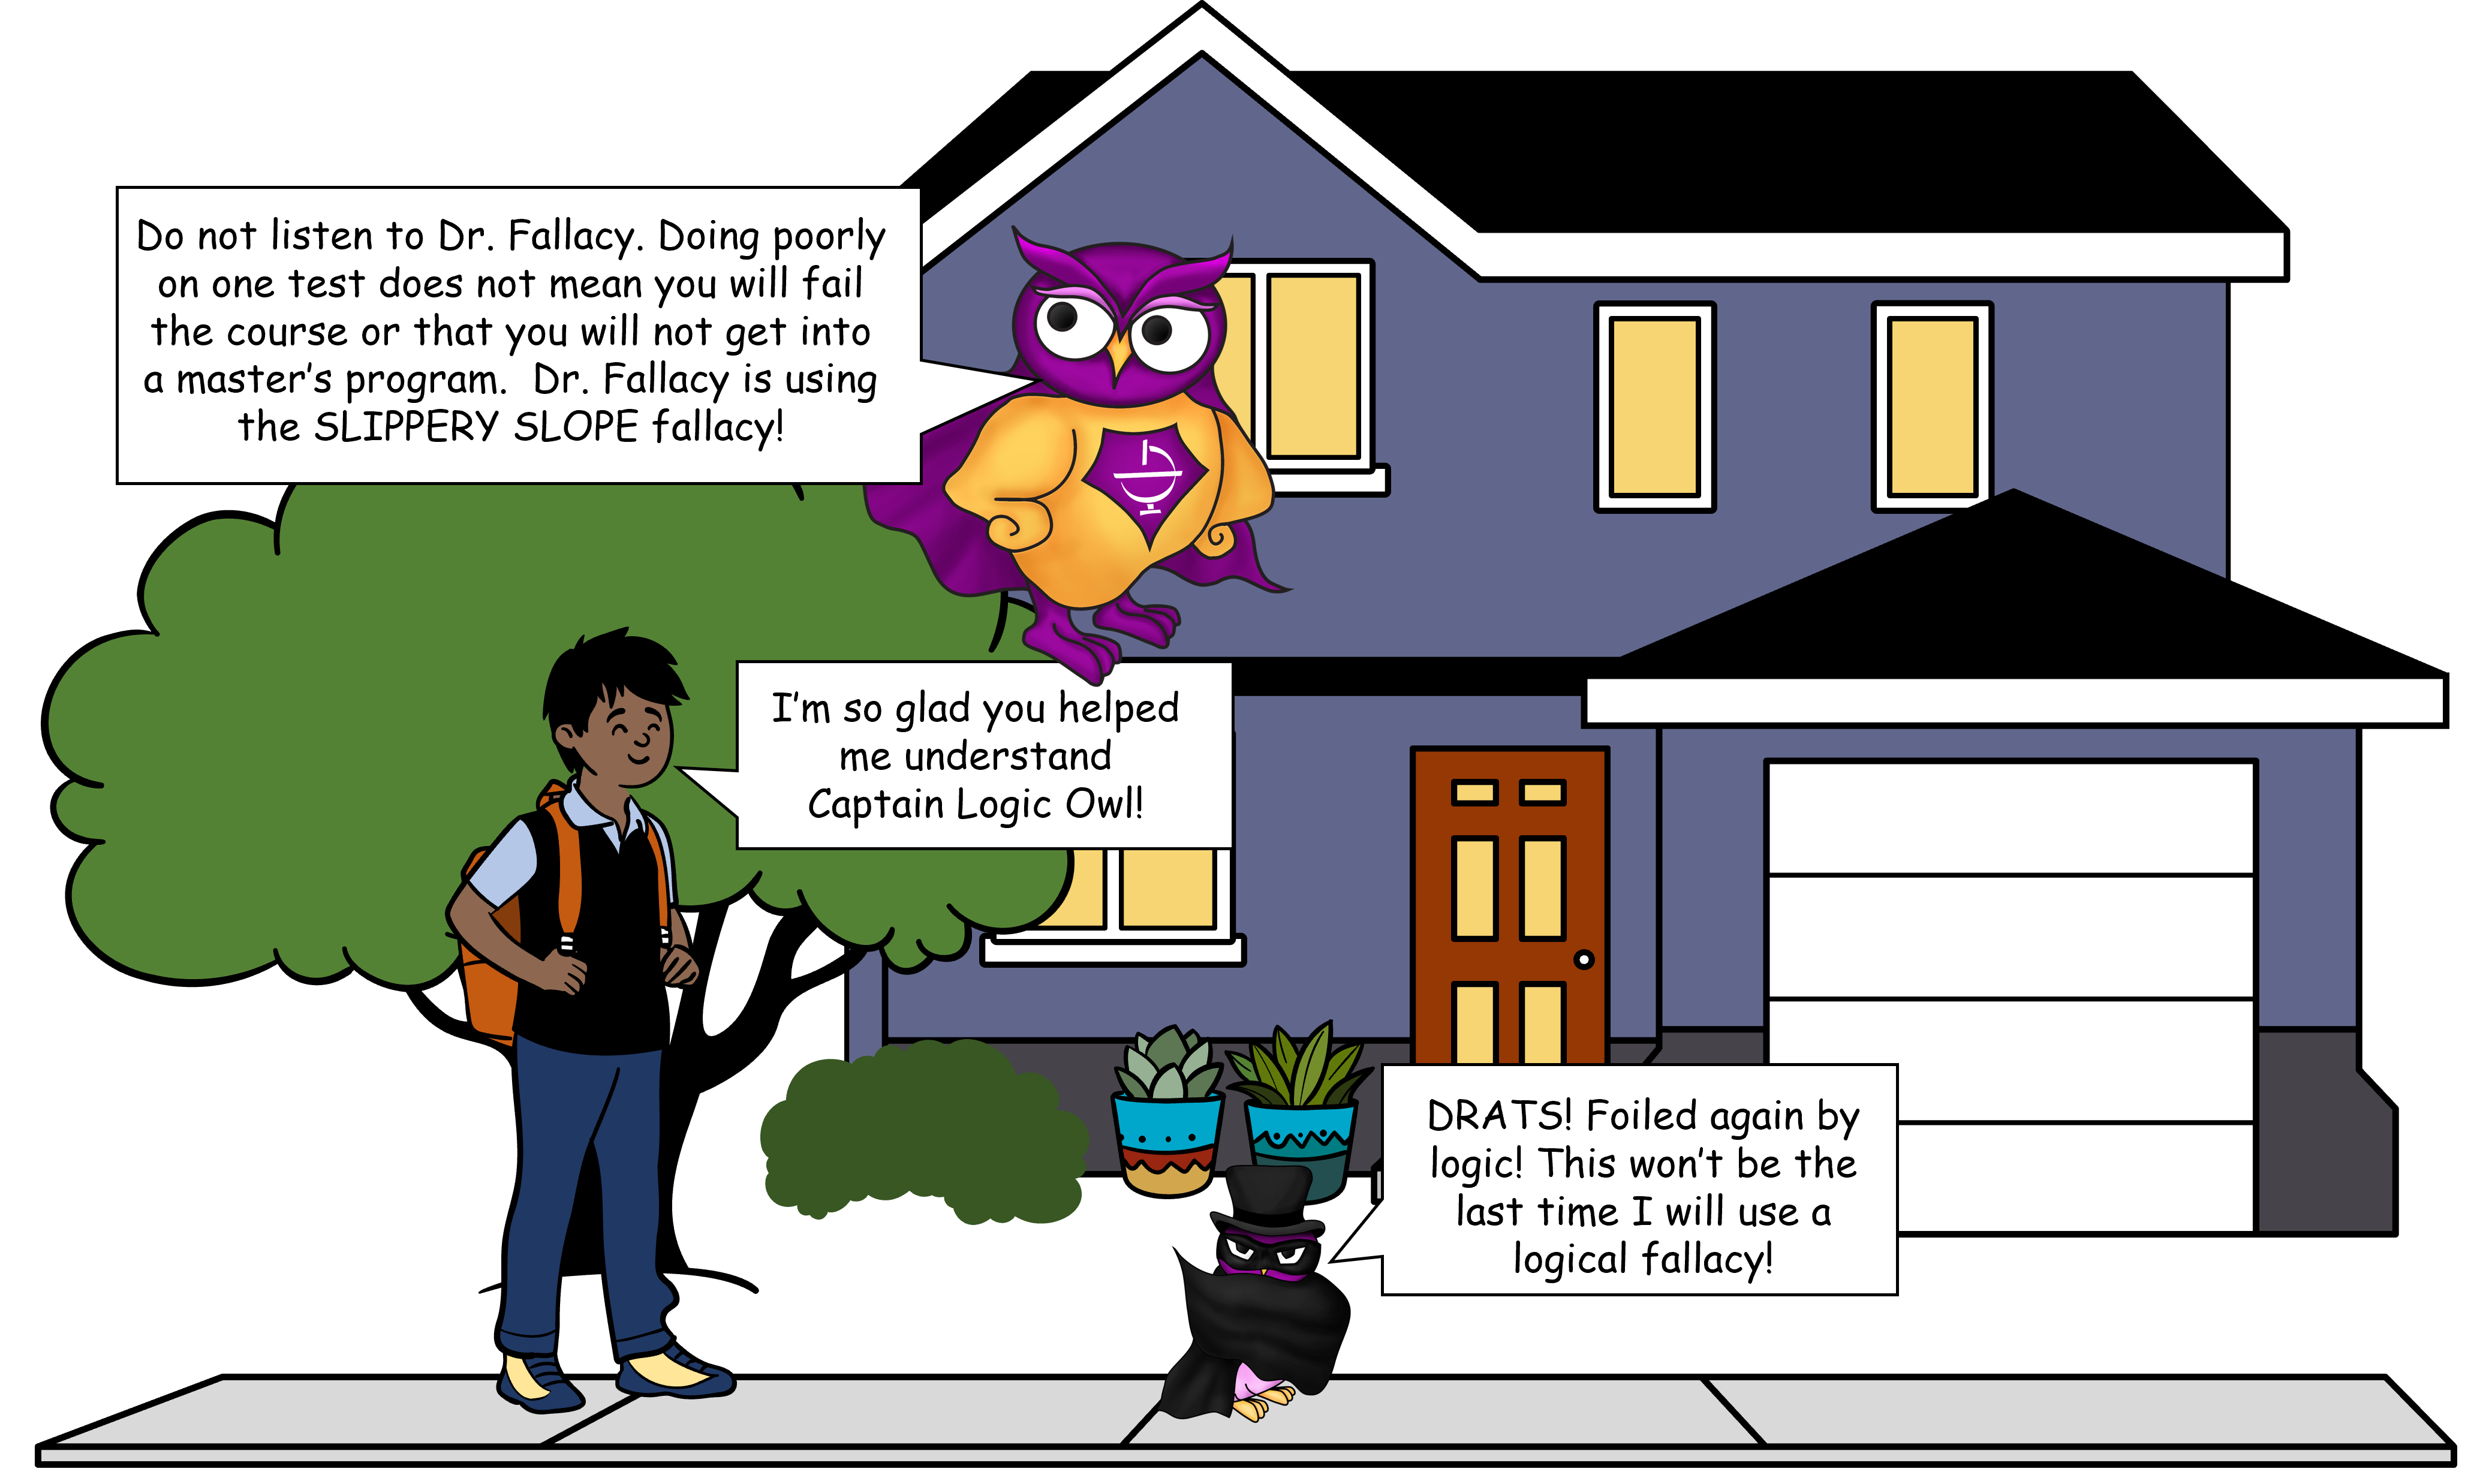 Slippery Slope logical fallacy comic with the OWL Superhero